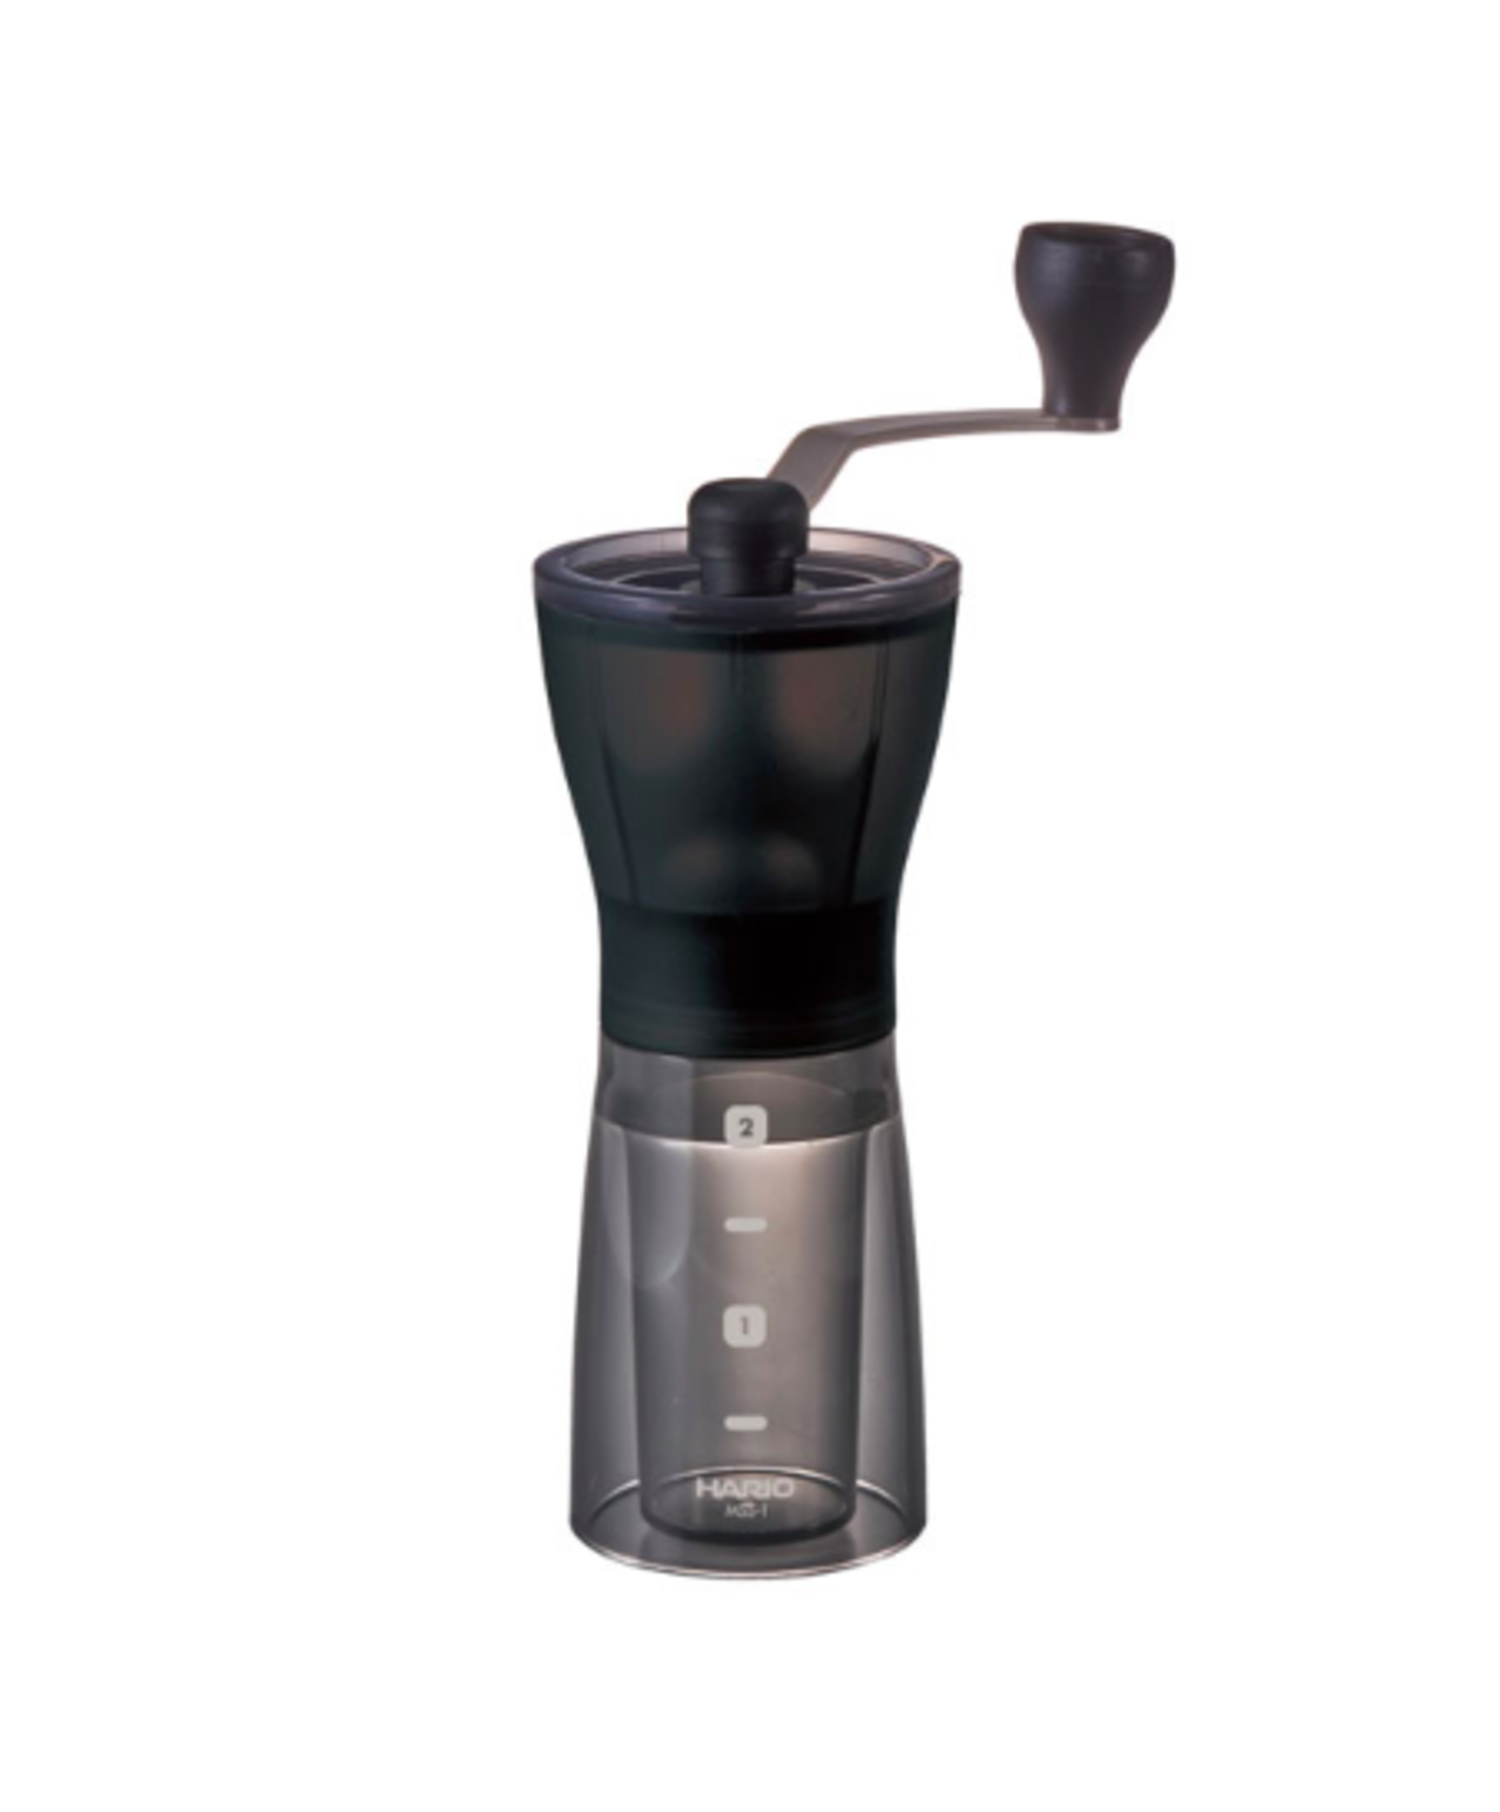 Hario Copper Manual Coffee Grinder - Whisk